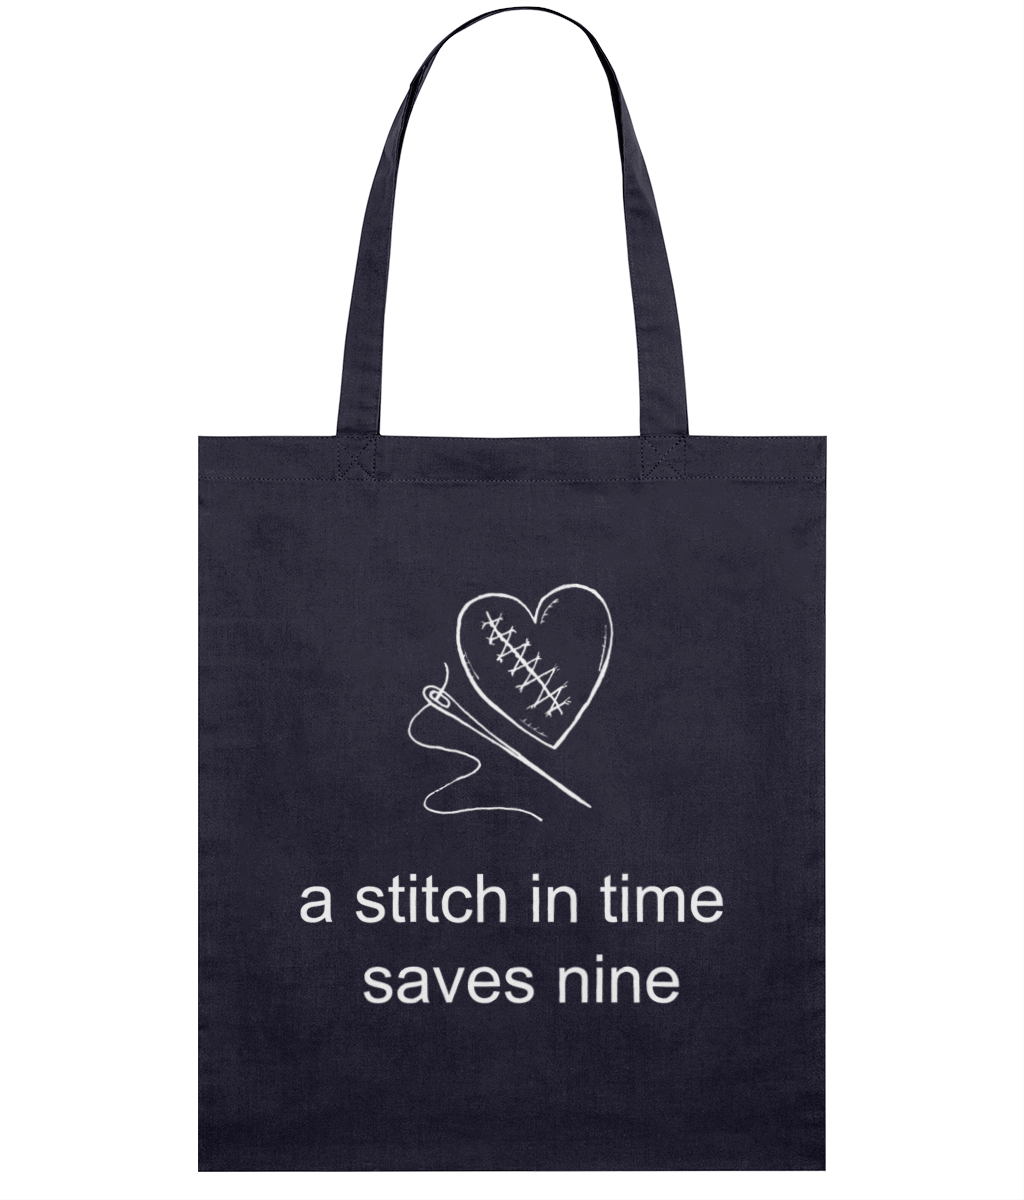 navy tote bag white print stitched heart